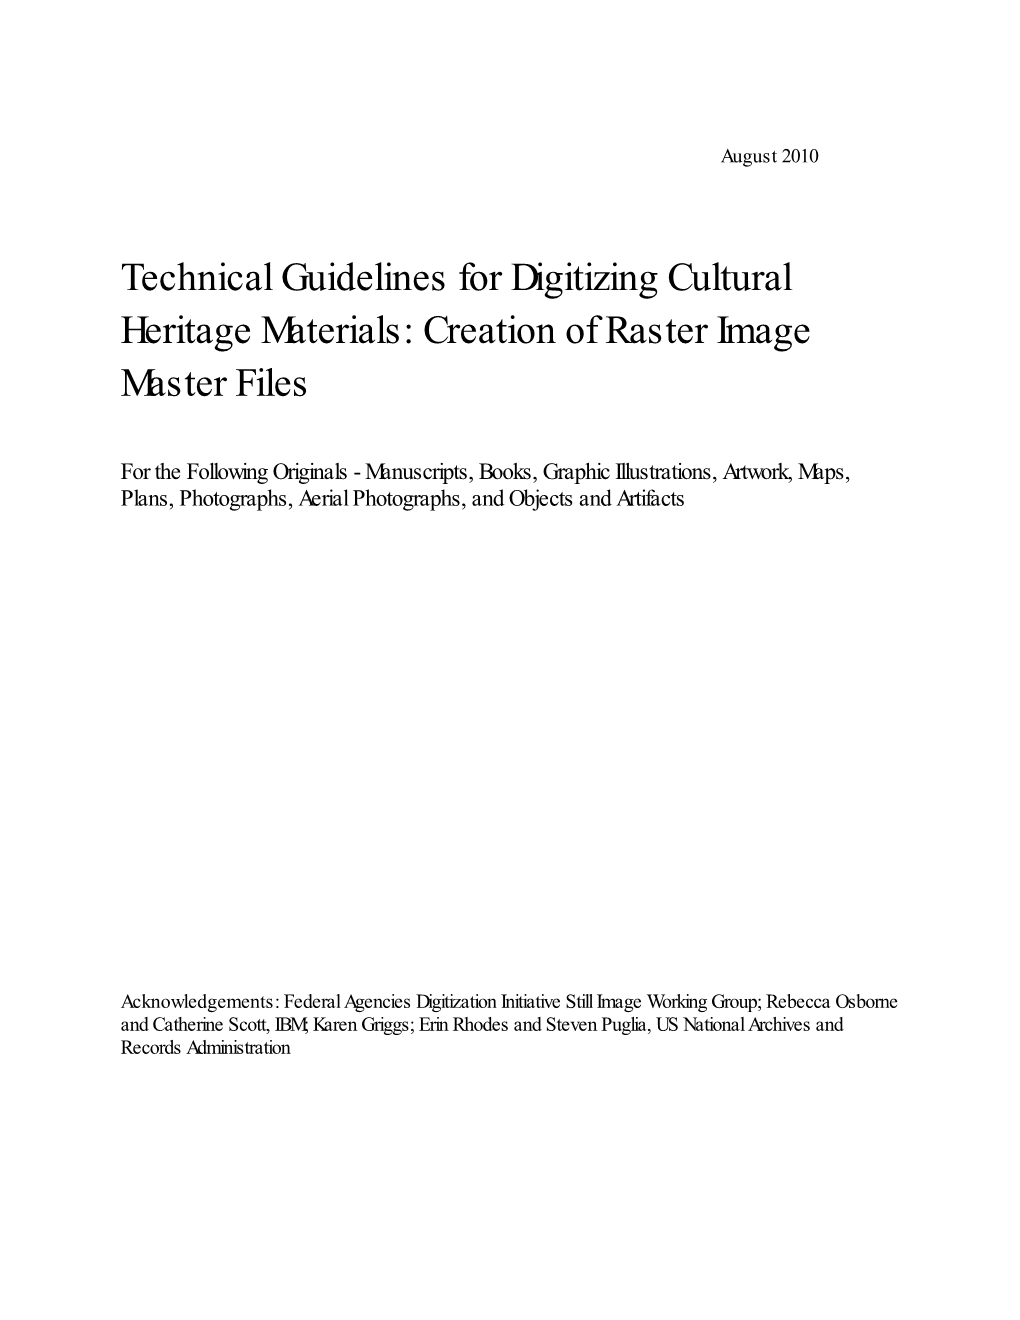 Technical Guidelines for Digitizing Cultural Heritage Materials: Creation of Raster Image Master Files